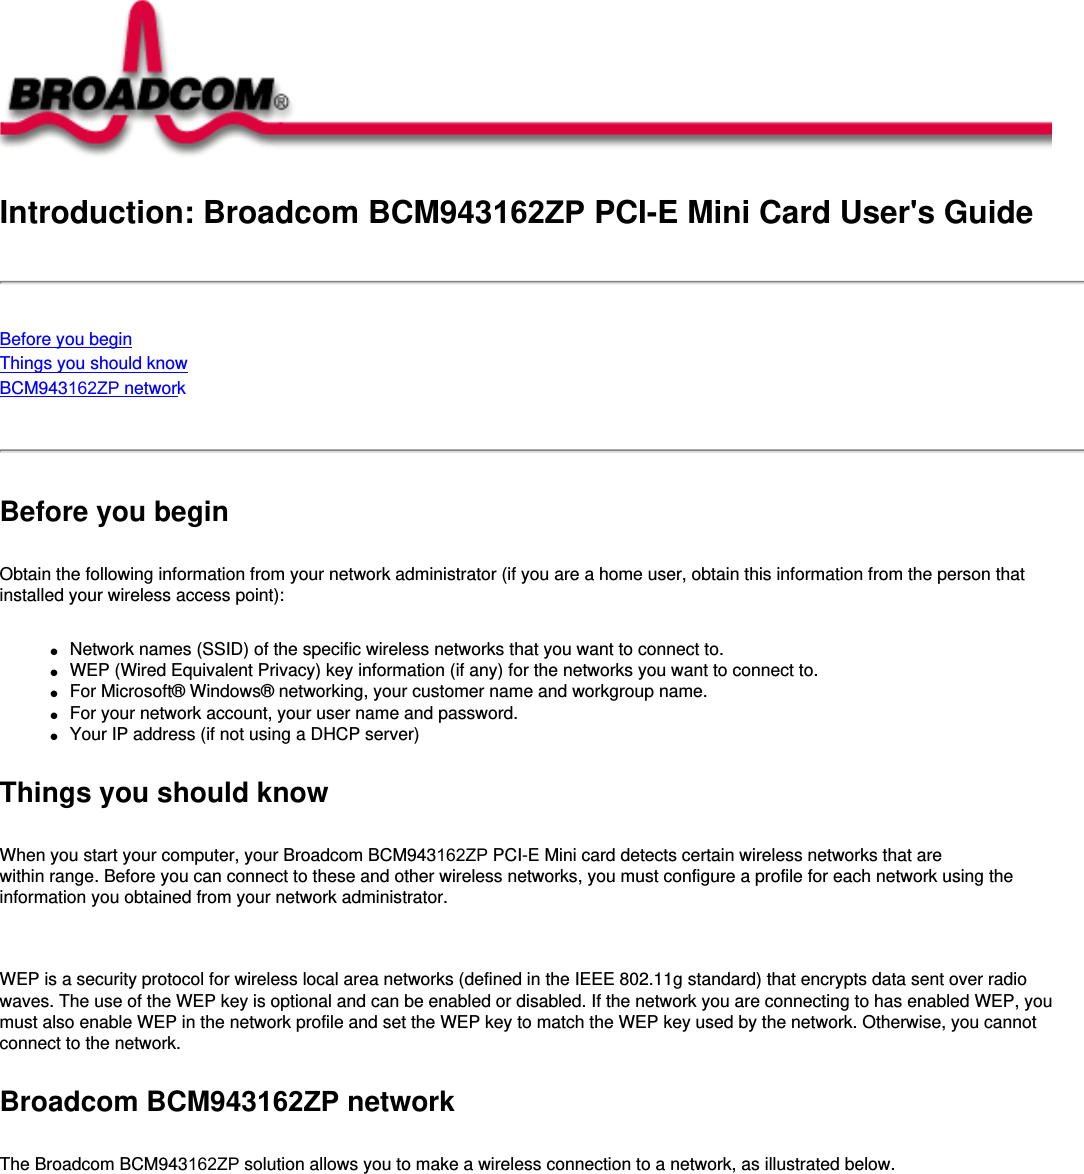 Introduction: Broadcom BCM943162ZP PCI-E Mini Card User&apos;s GuideBefore you beginThings you should knowBCM943162ZP network Before you beginObtain the following information from your network administrator (if you are a home user, obtain this information from the person that installed your wireless access point):●     Network names (SSID) of the specific wireless networks that you want to connect to.●     WEP (Wired Equivalent Privacy) key information (if any) for the networks you want to connect to.●     For Microsoft® Windows® networking, your customer name and workgroup name.●     For your network account, your user name and password.●     Your IP address (if not using a DHCP server)Things you should knowWhen you start your computer, your Broadcom BCM943162ZP PCI-E Mini card detects certain wireless networks that are within range. Before you can connect to these and other wireless networks, you must configure a profile for each network using the information you obtained from your network administrator.   WEP is a security protocol for wireless local area networks (defined in the IEEE 802.11g standard) that encrypts data sent over radio waves. The use of the WEP key is optional and can be enabled or disabled. If the network you are connecting to has enabled WEP, you must also enable WEP in the network profile and set the WEP key to match the WEP key used by the network. Otherwise, you cannot connect to the network.Broadcom BCM943162ZP networkThe Broadcom BCM943162ZP solution allows you to make a wireless connection to a network, as illustrated below.